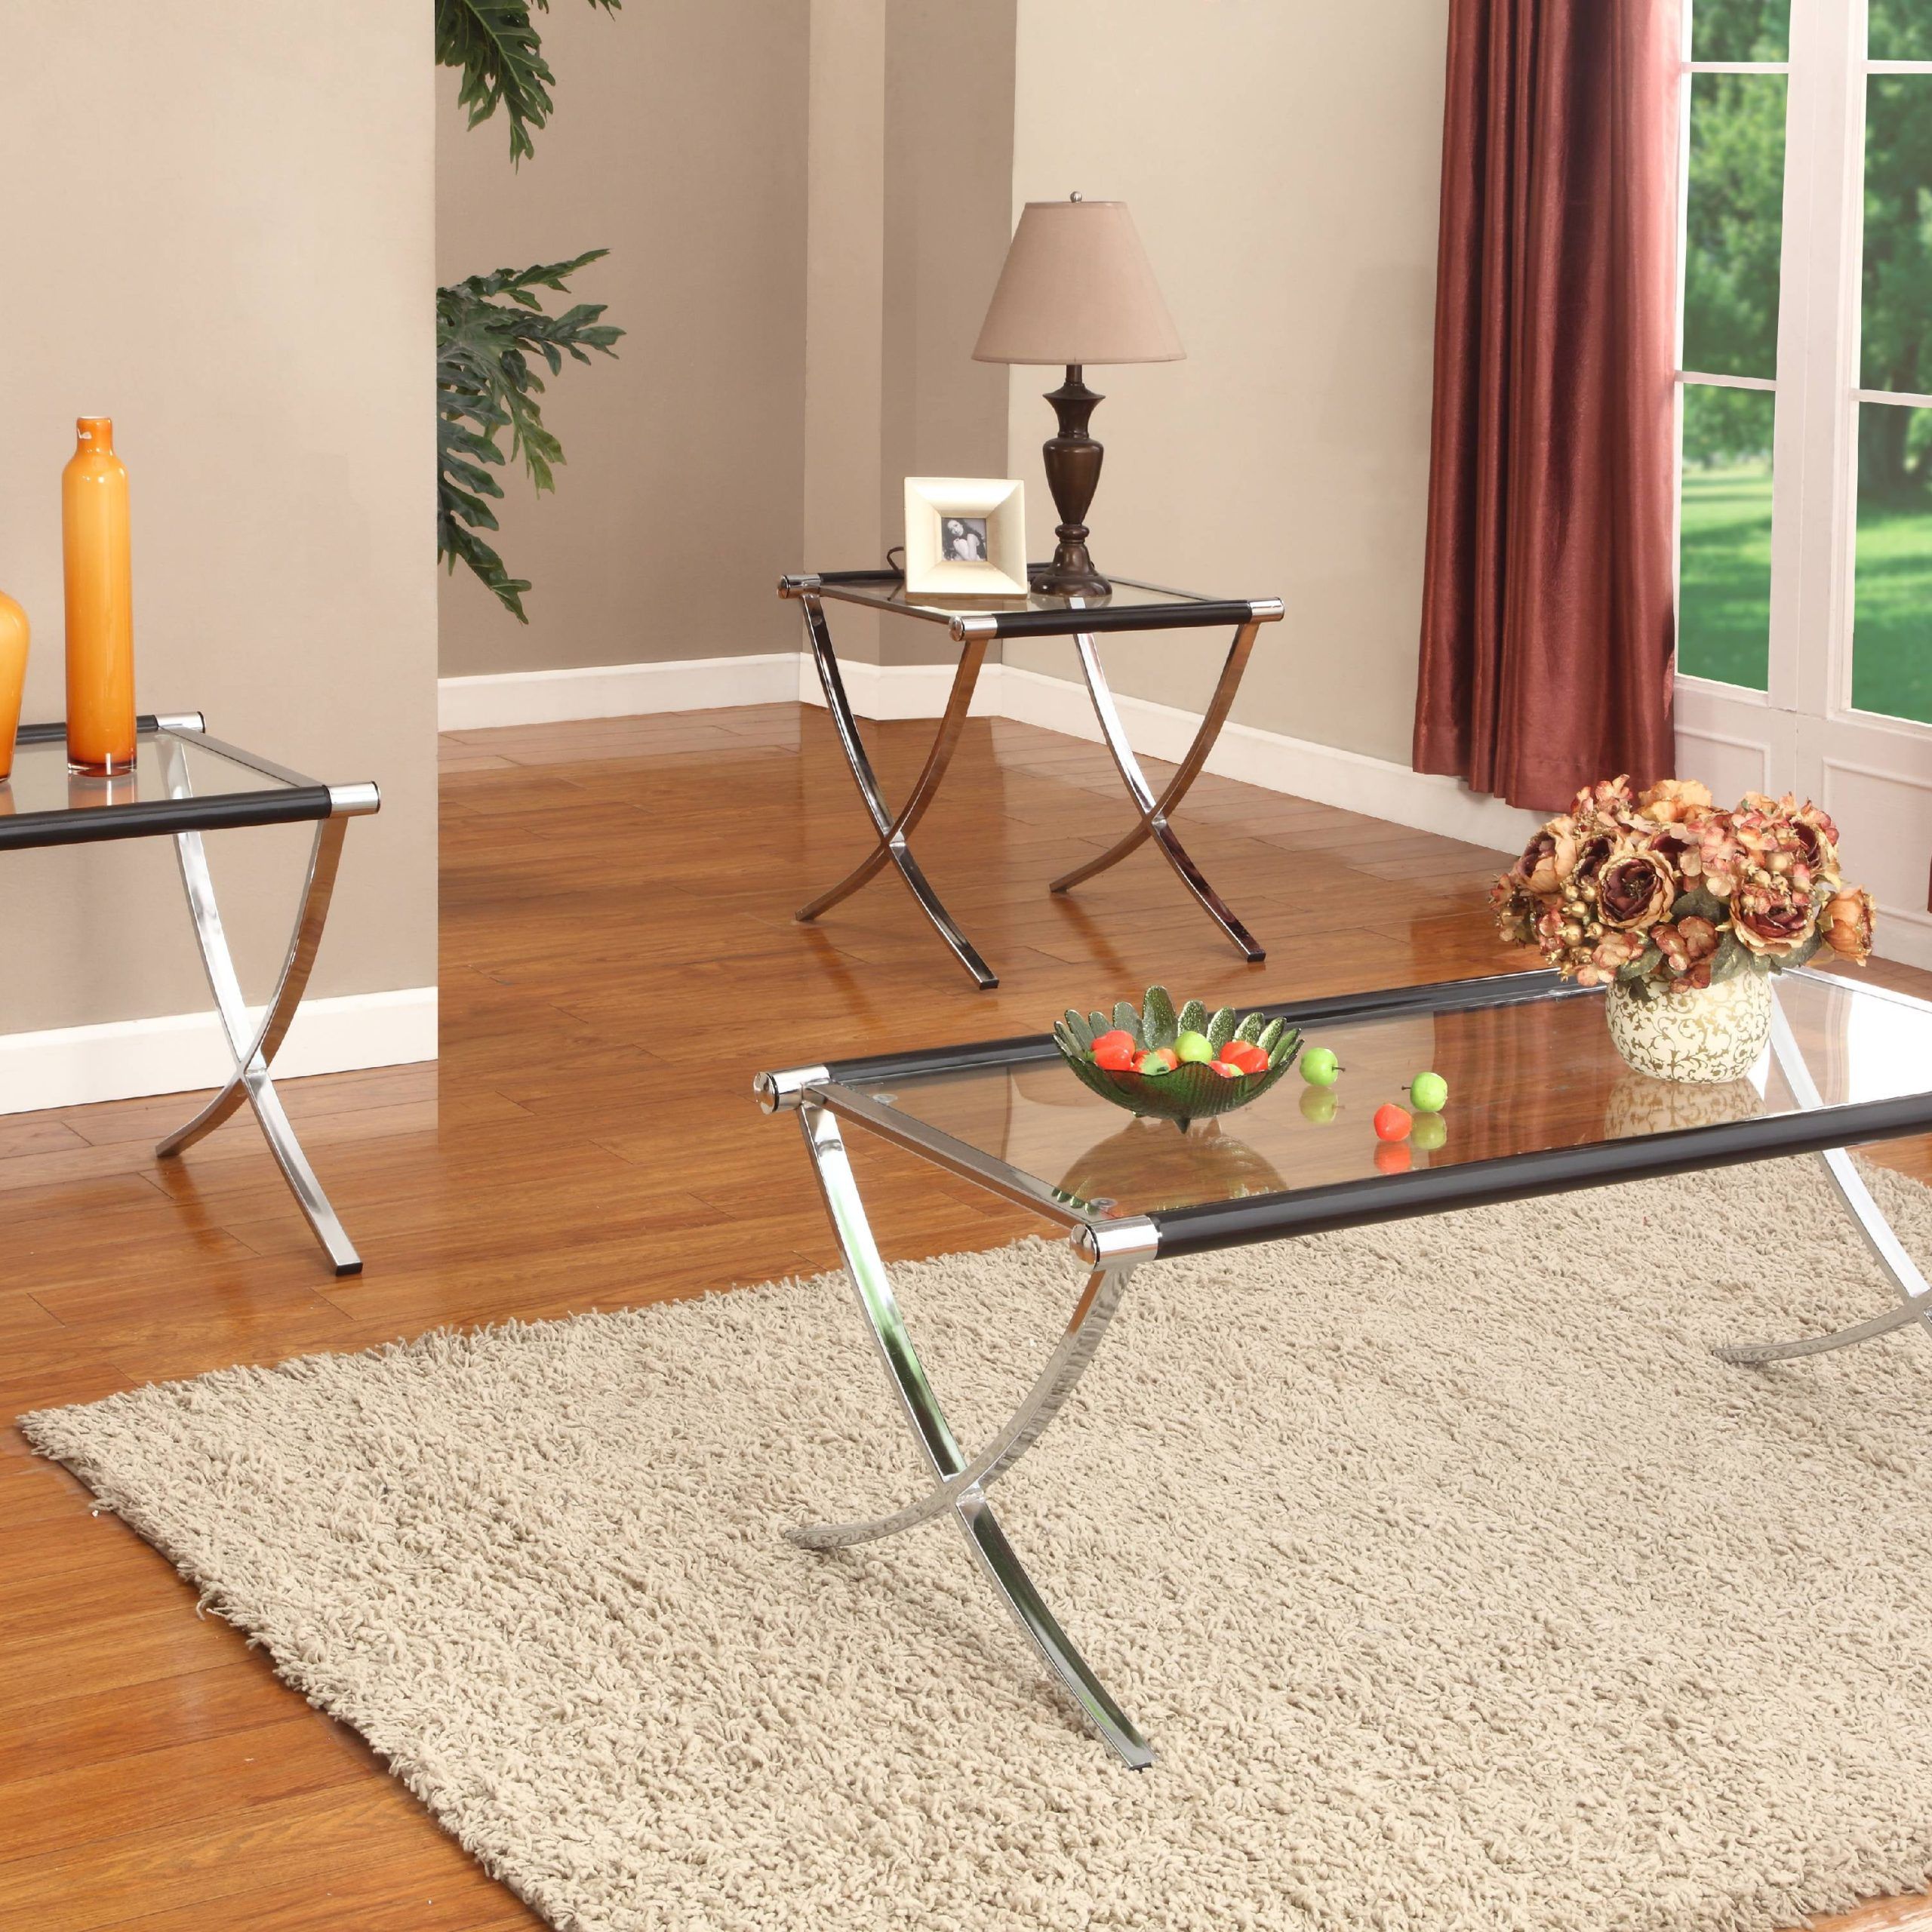 Peggie 3 Piece Coffee Table Set, Chrome Metal Frame & Tempered Glass In Glossy Finished Metal Coffee Tables (View 15 of 20)